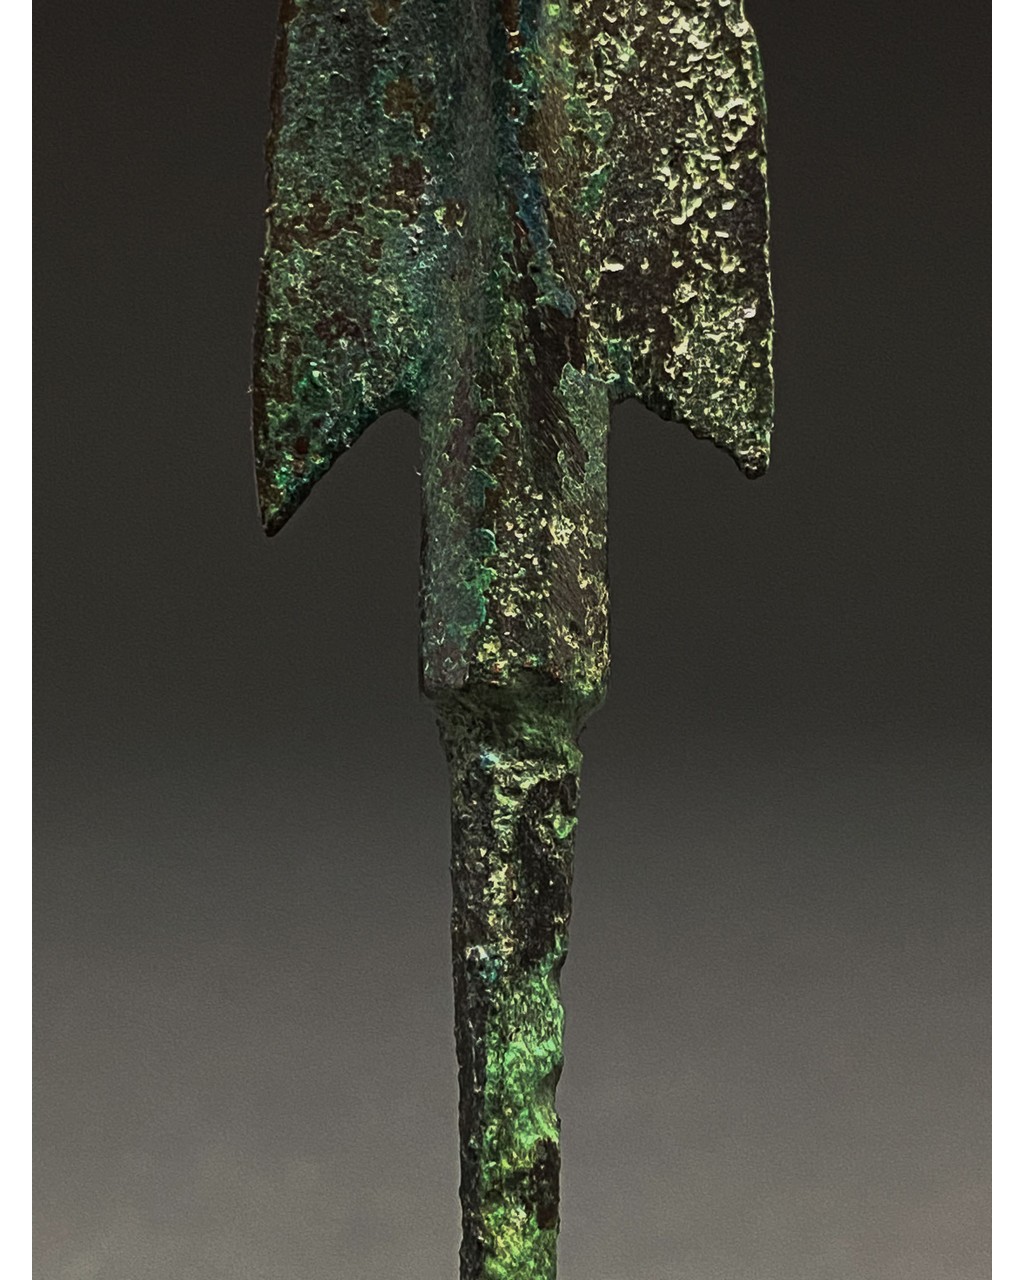 ANCIENT BRONZE SPEAR ON STAND - Image 3 of 3